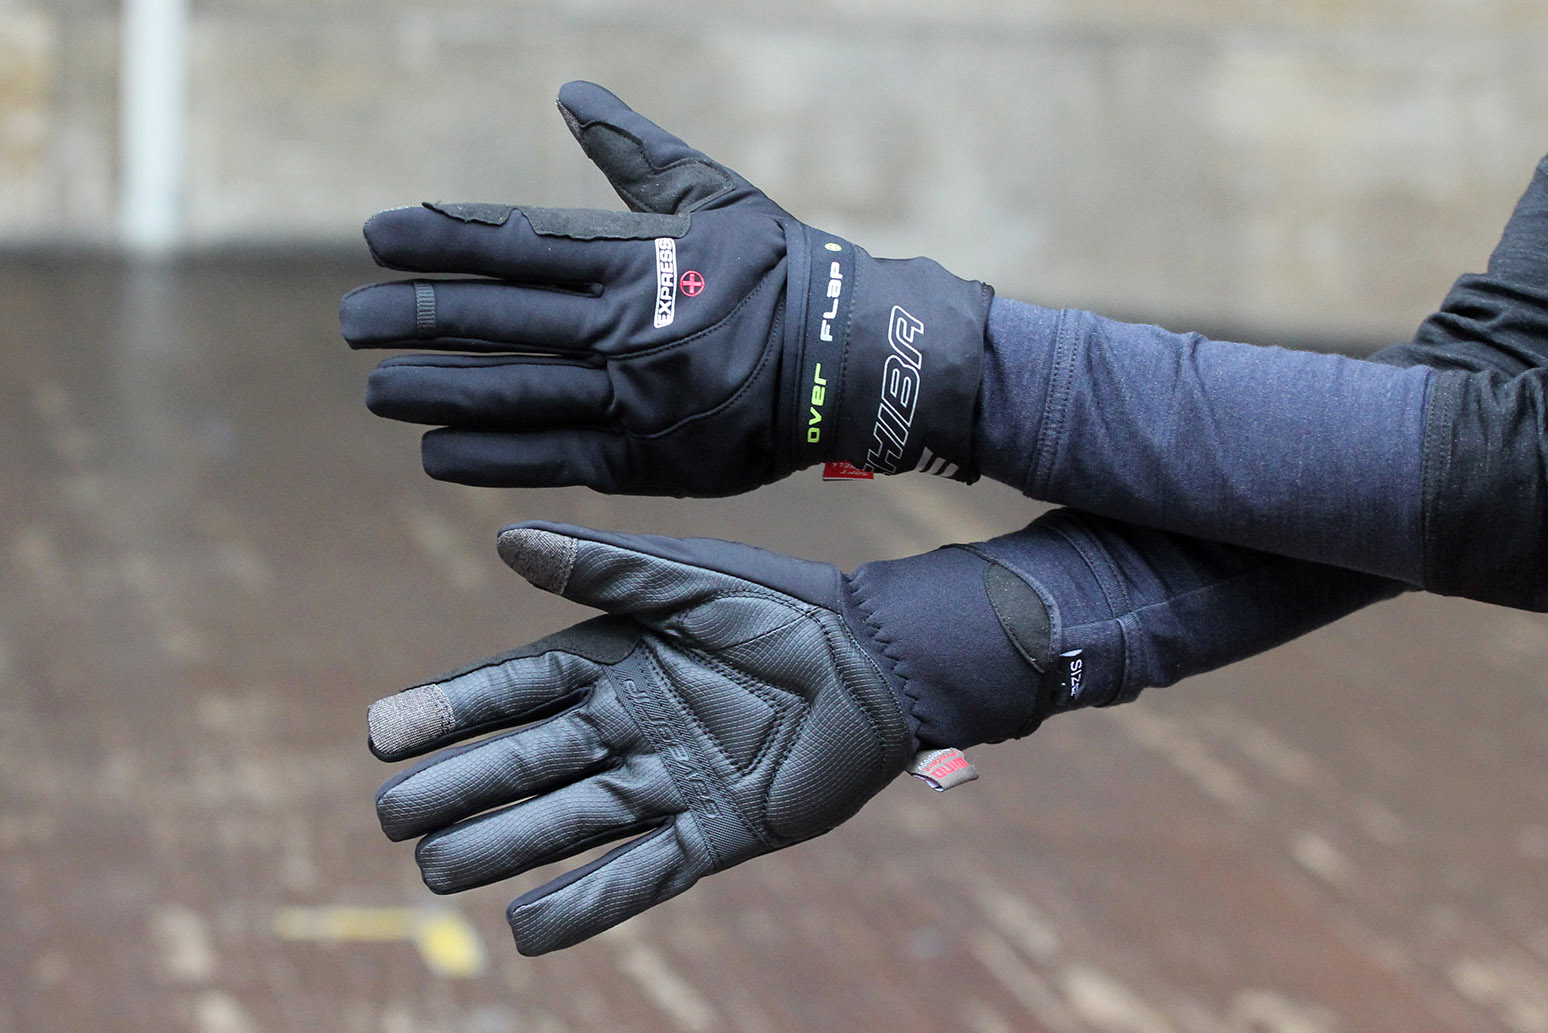 Chiba Classic Windprotect Full Finger Glove in Black All Sizes 